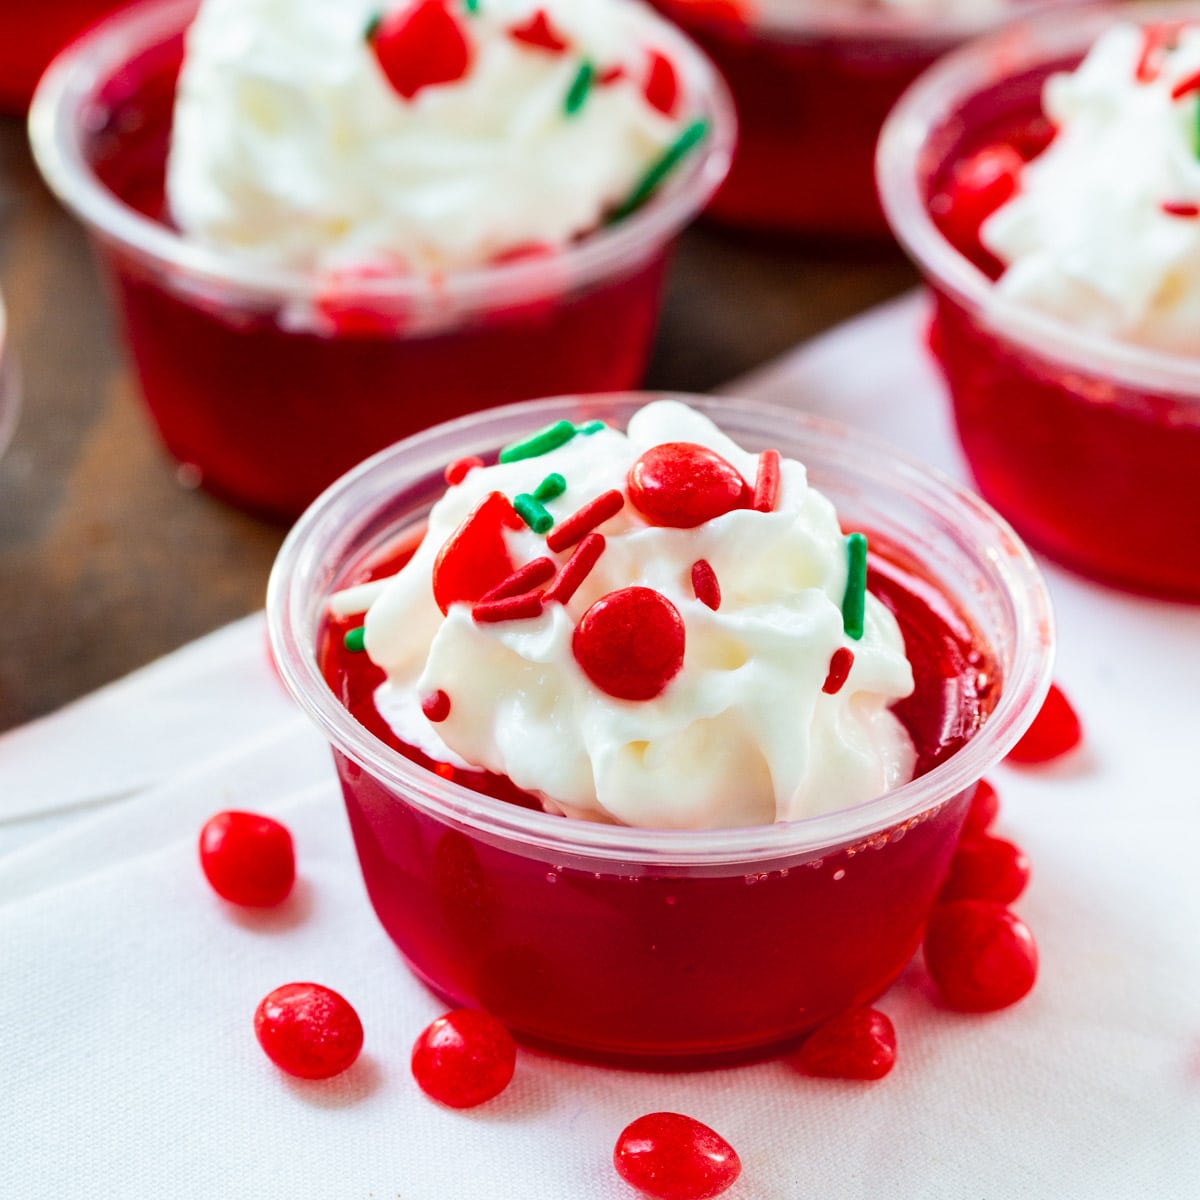 Fireball Jello Shots topped with whipped cream and sprinkles.